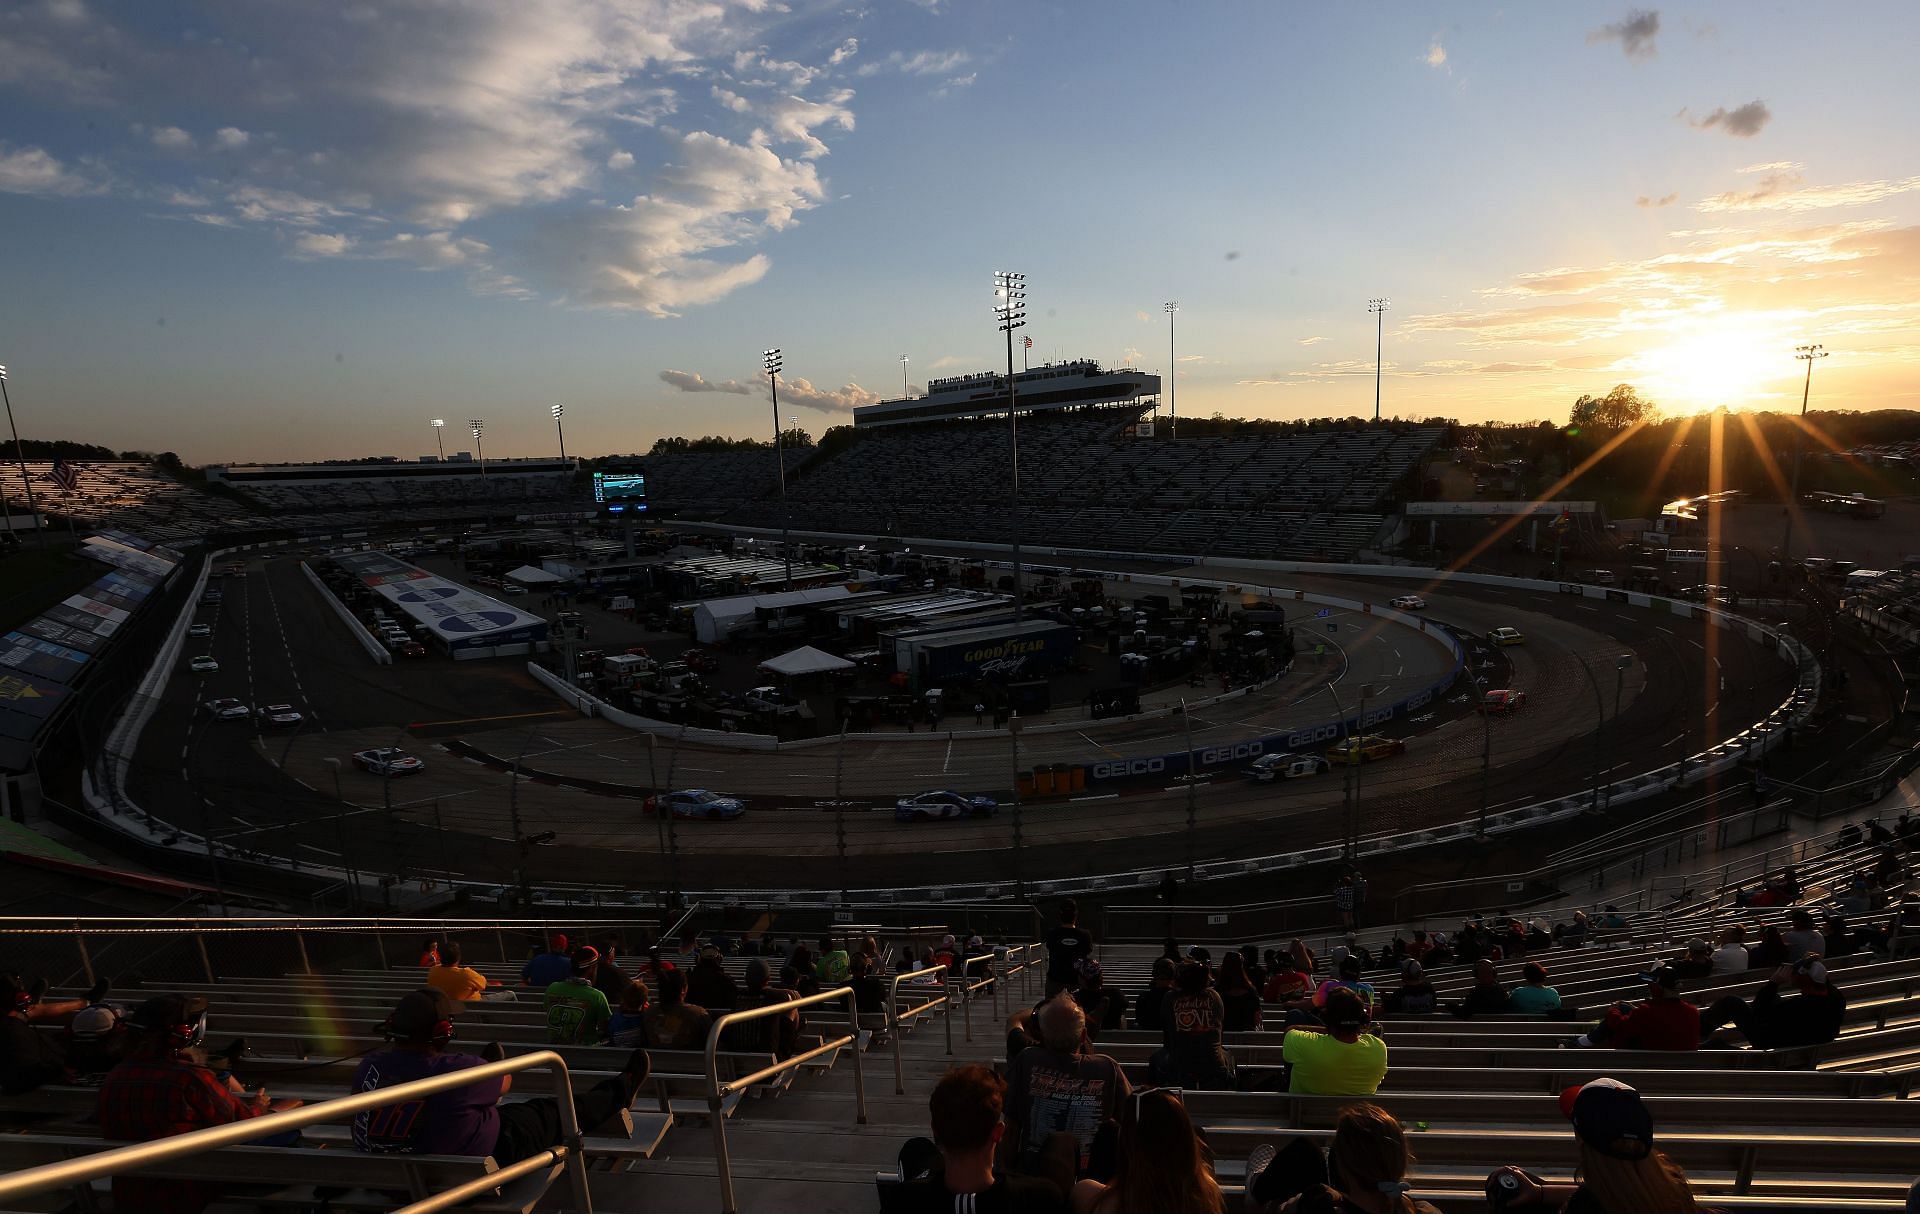 A general view of the race from the grandstands as the sun sets during the NASCAR Cup Series Blue-Emu Maximum Pain Relief 500 at Martinsville Speedway (Photo by James Gilbert/Getty Images)